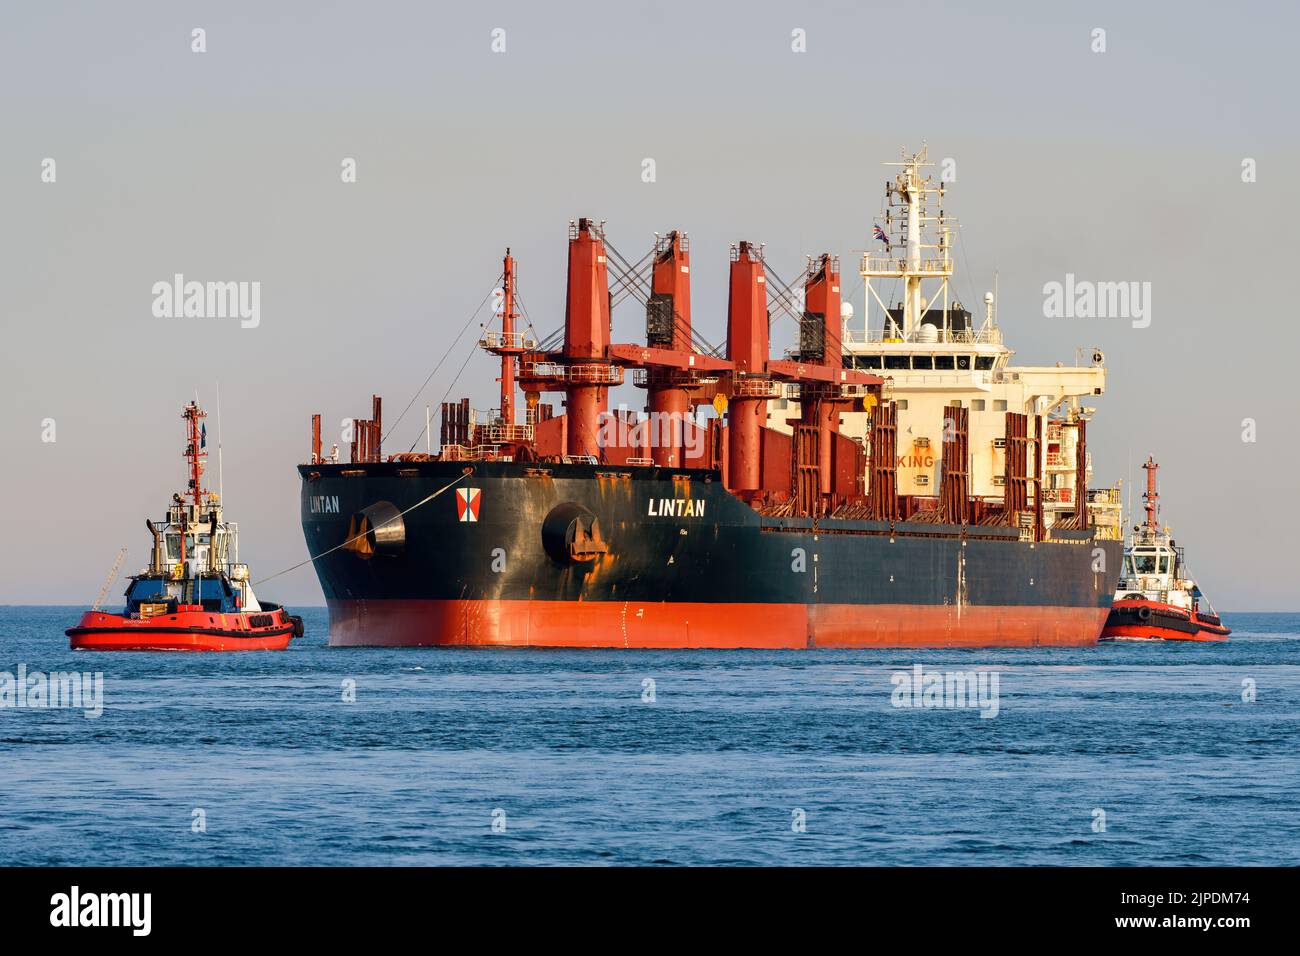 The bulk carrier Lintan is one of 36 vessels owned and operated by Singapore-based Swire Shipping - July 2021. Stock Photo